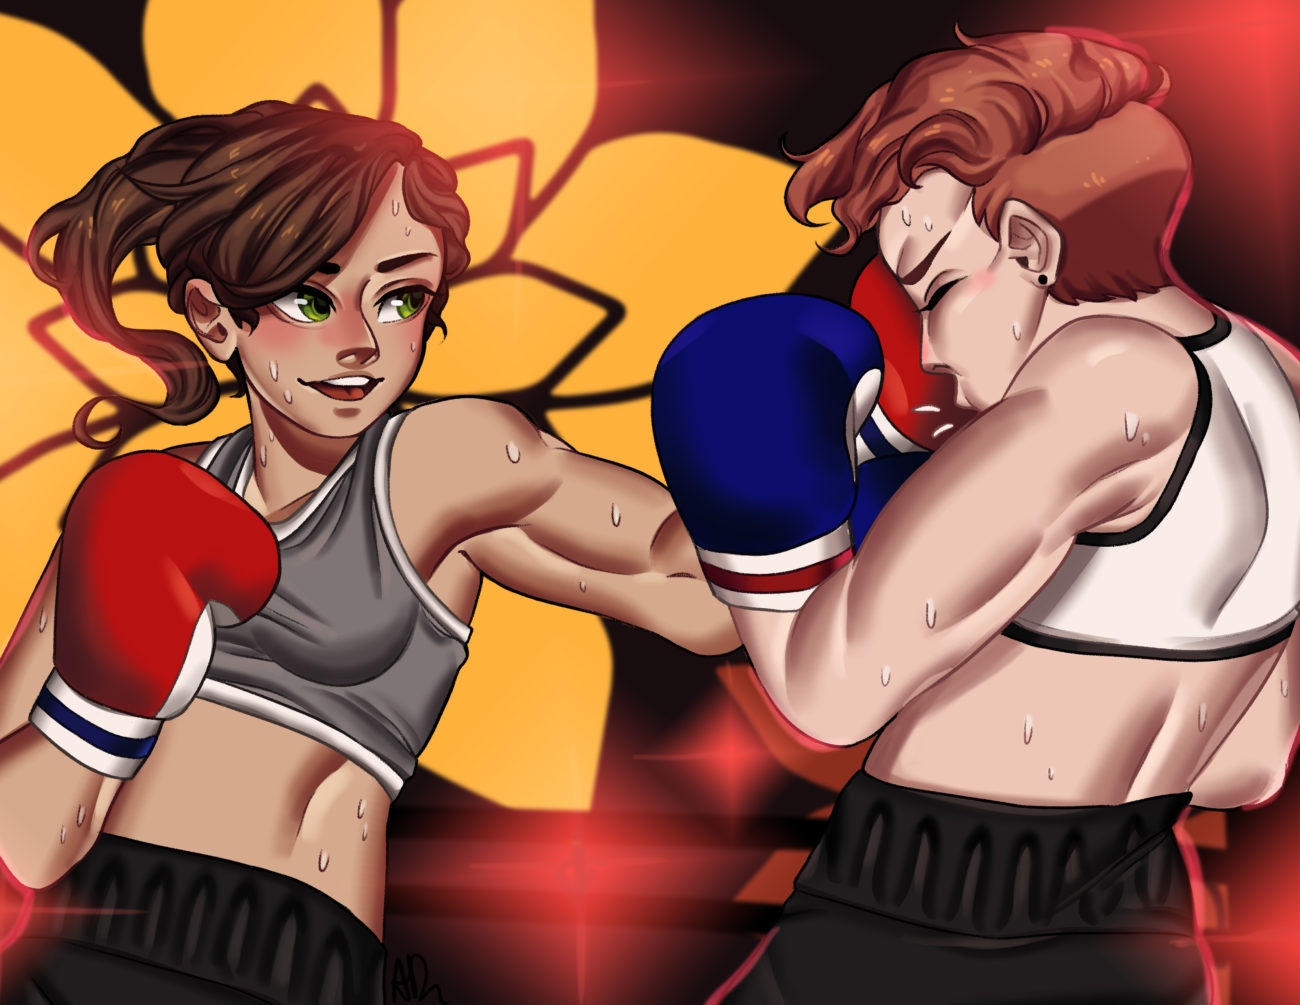 Punching for a greater cause: Local boxing club empowering women through sport